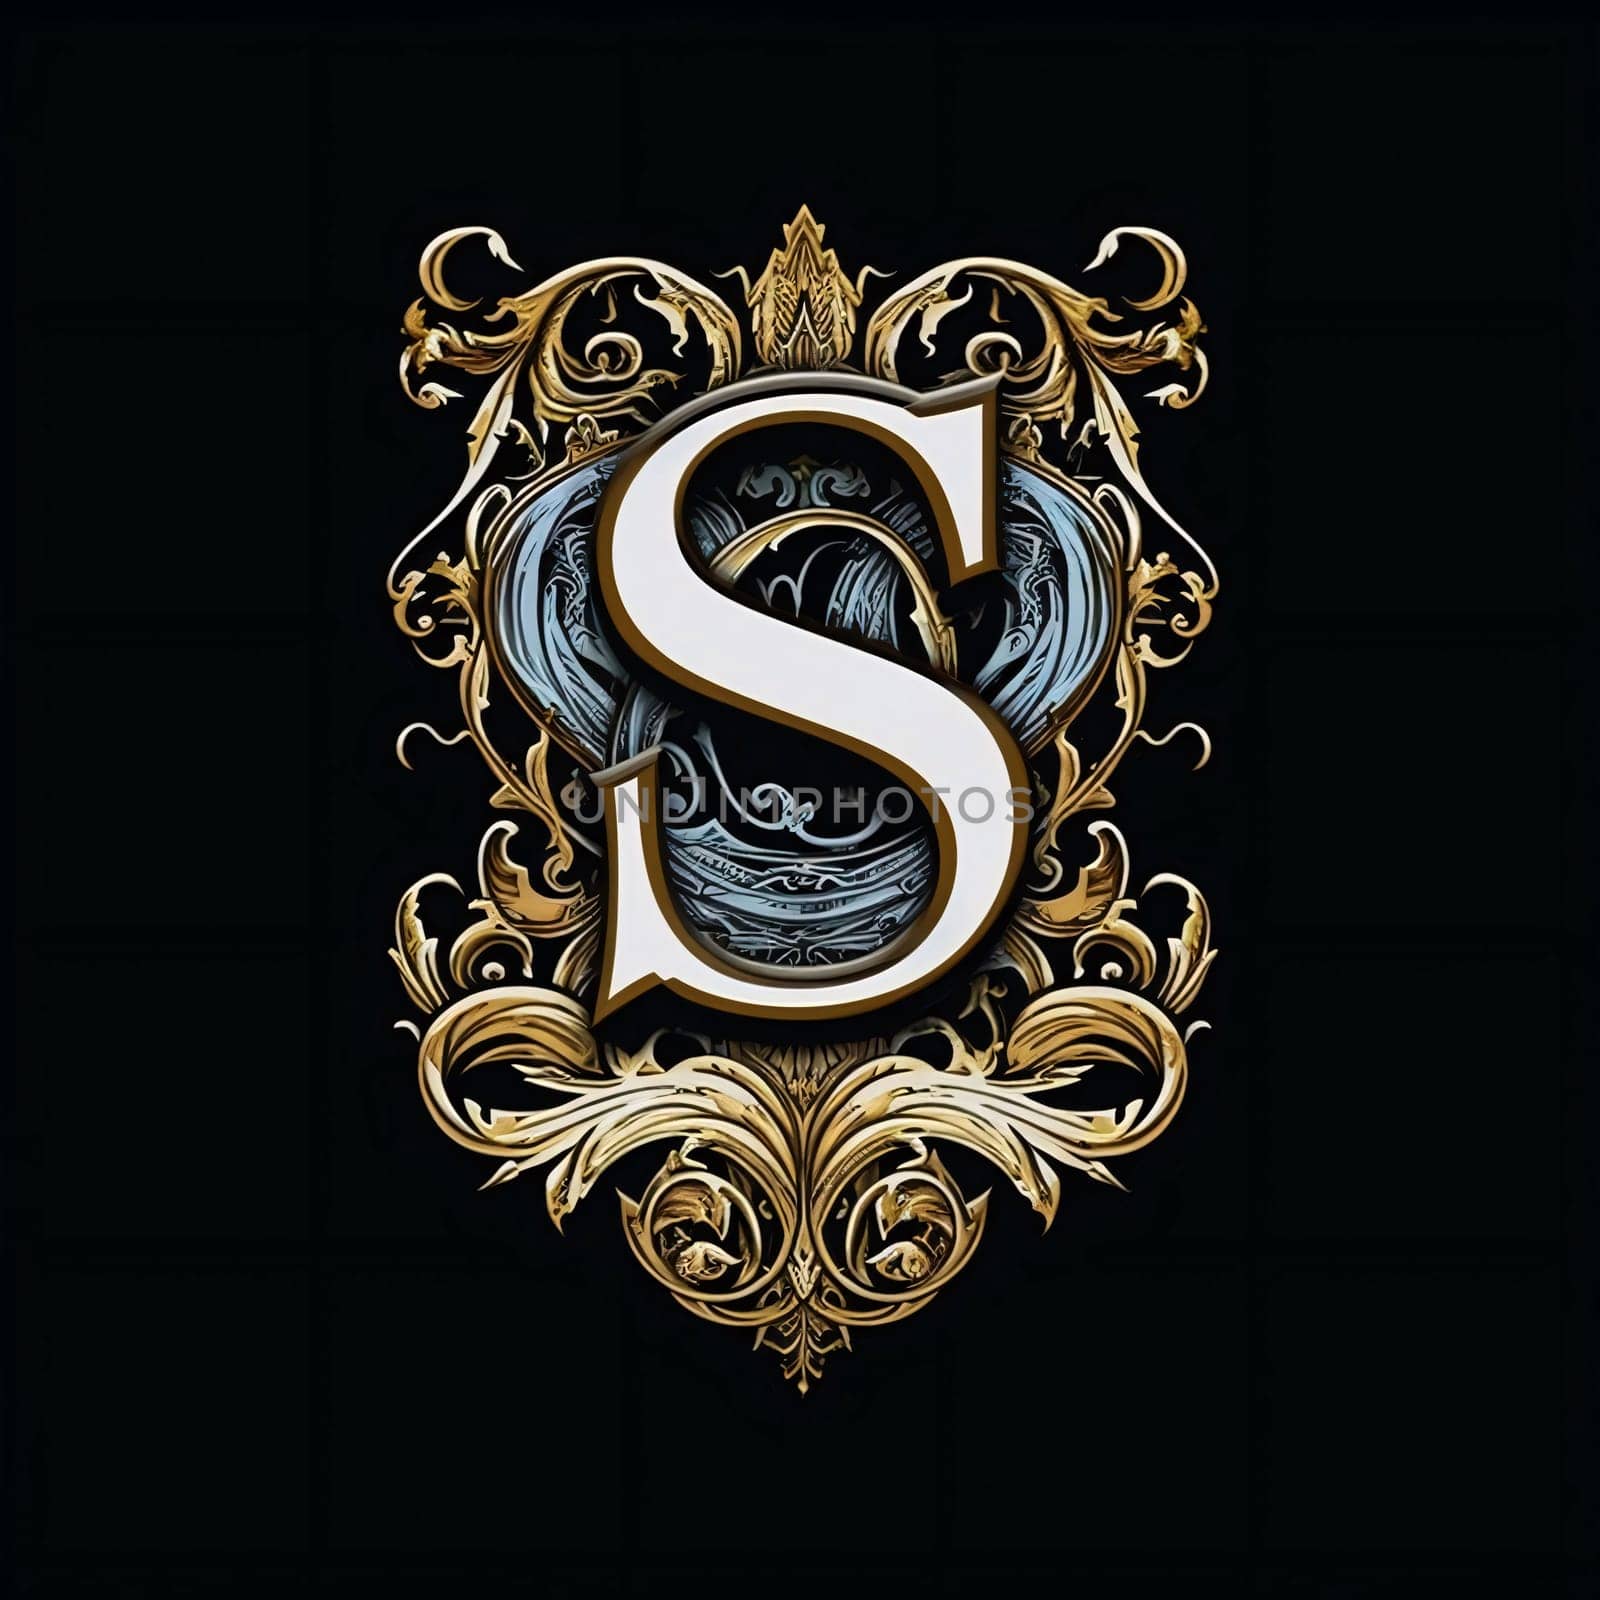 Graphic alphabet letters: Vintage letter S in the style of Baroque on a black background.